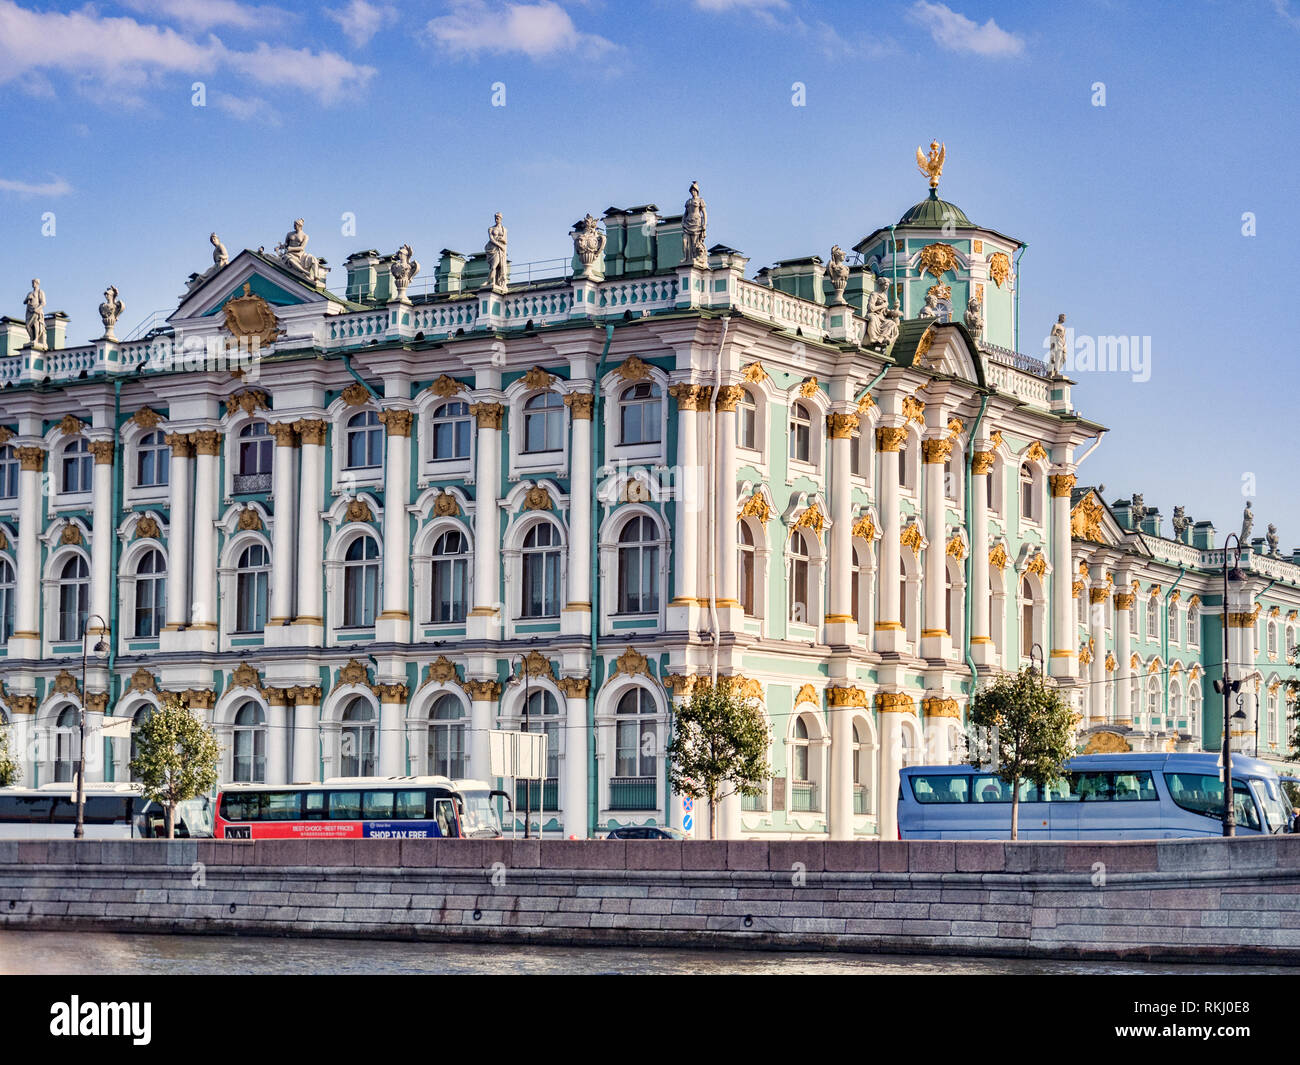 19 September 2018: St Petersburg, Russia - The Winter Palace and State Hermitage Museum, on the Neva Embankment, and tour coaches parked outside. Stock Photo